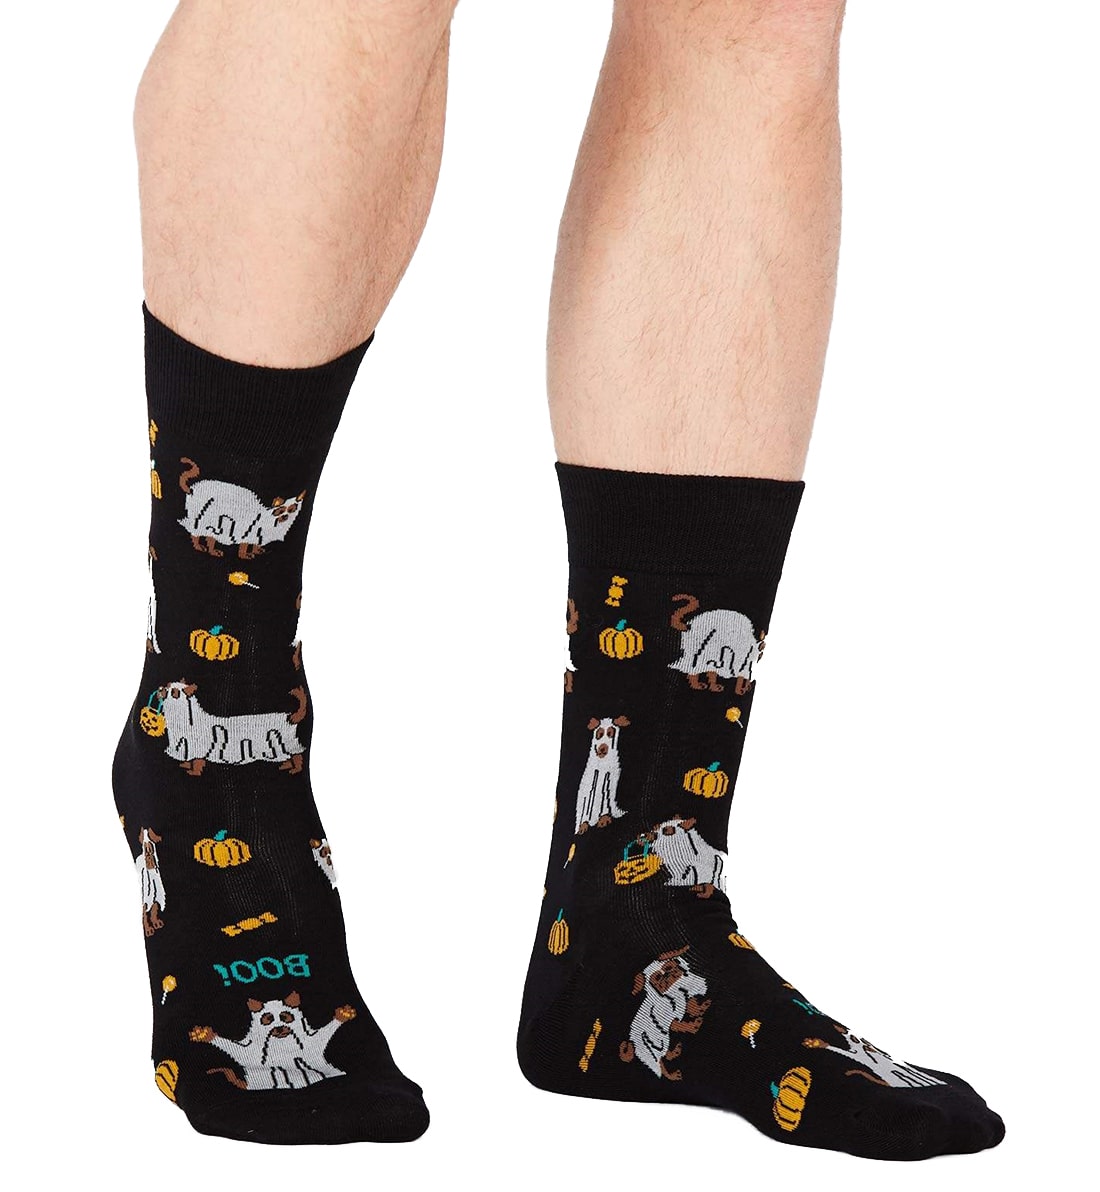 SOCK it to me Men's Crew Socks (mef0324),Trick Or Treat - Trick Or Treat,One Size